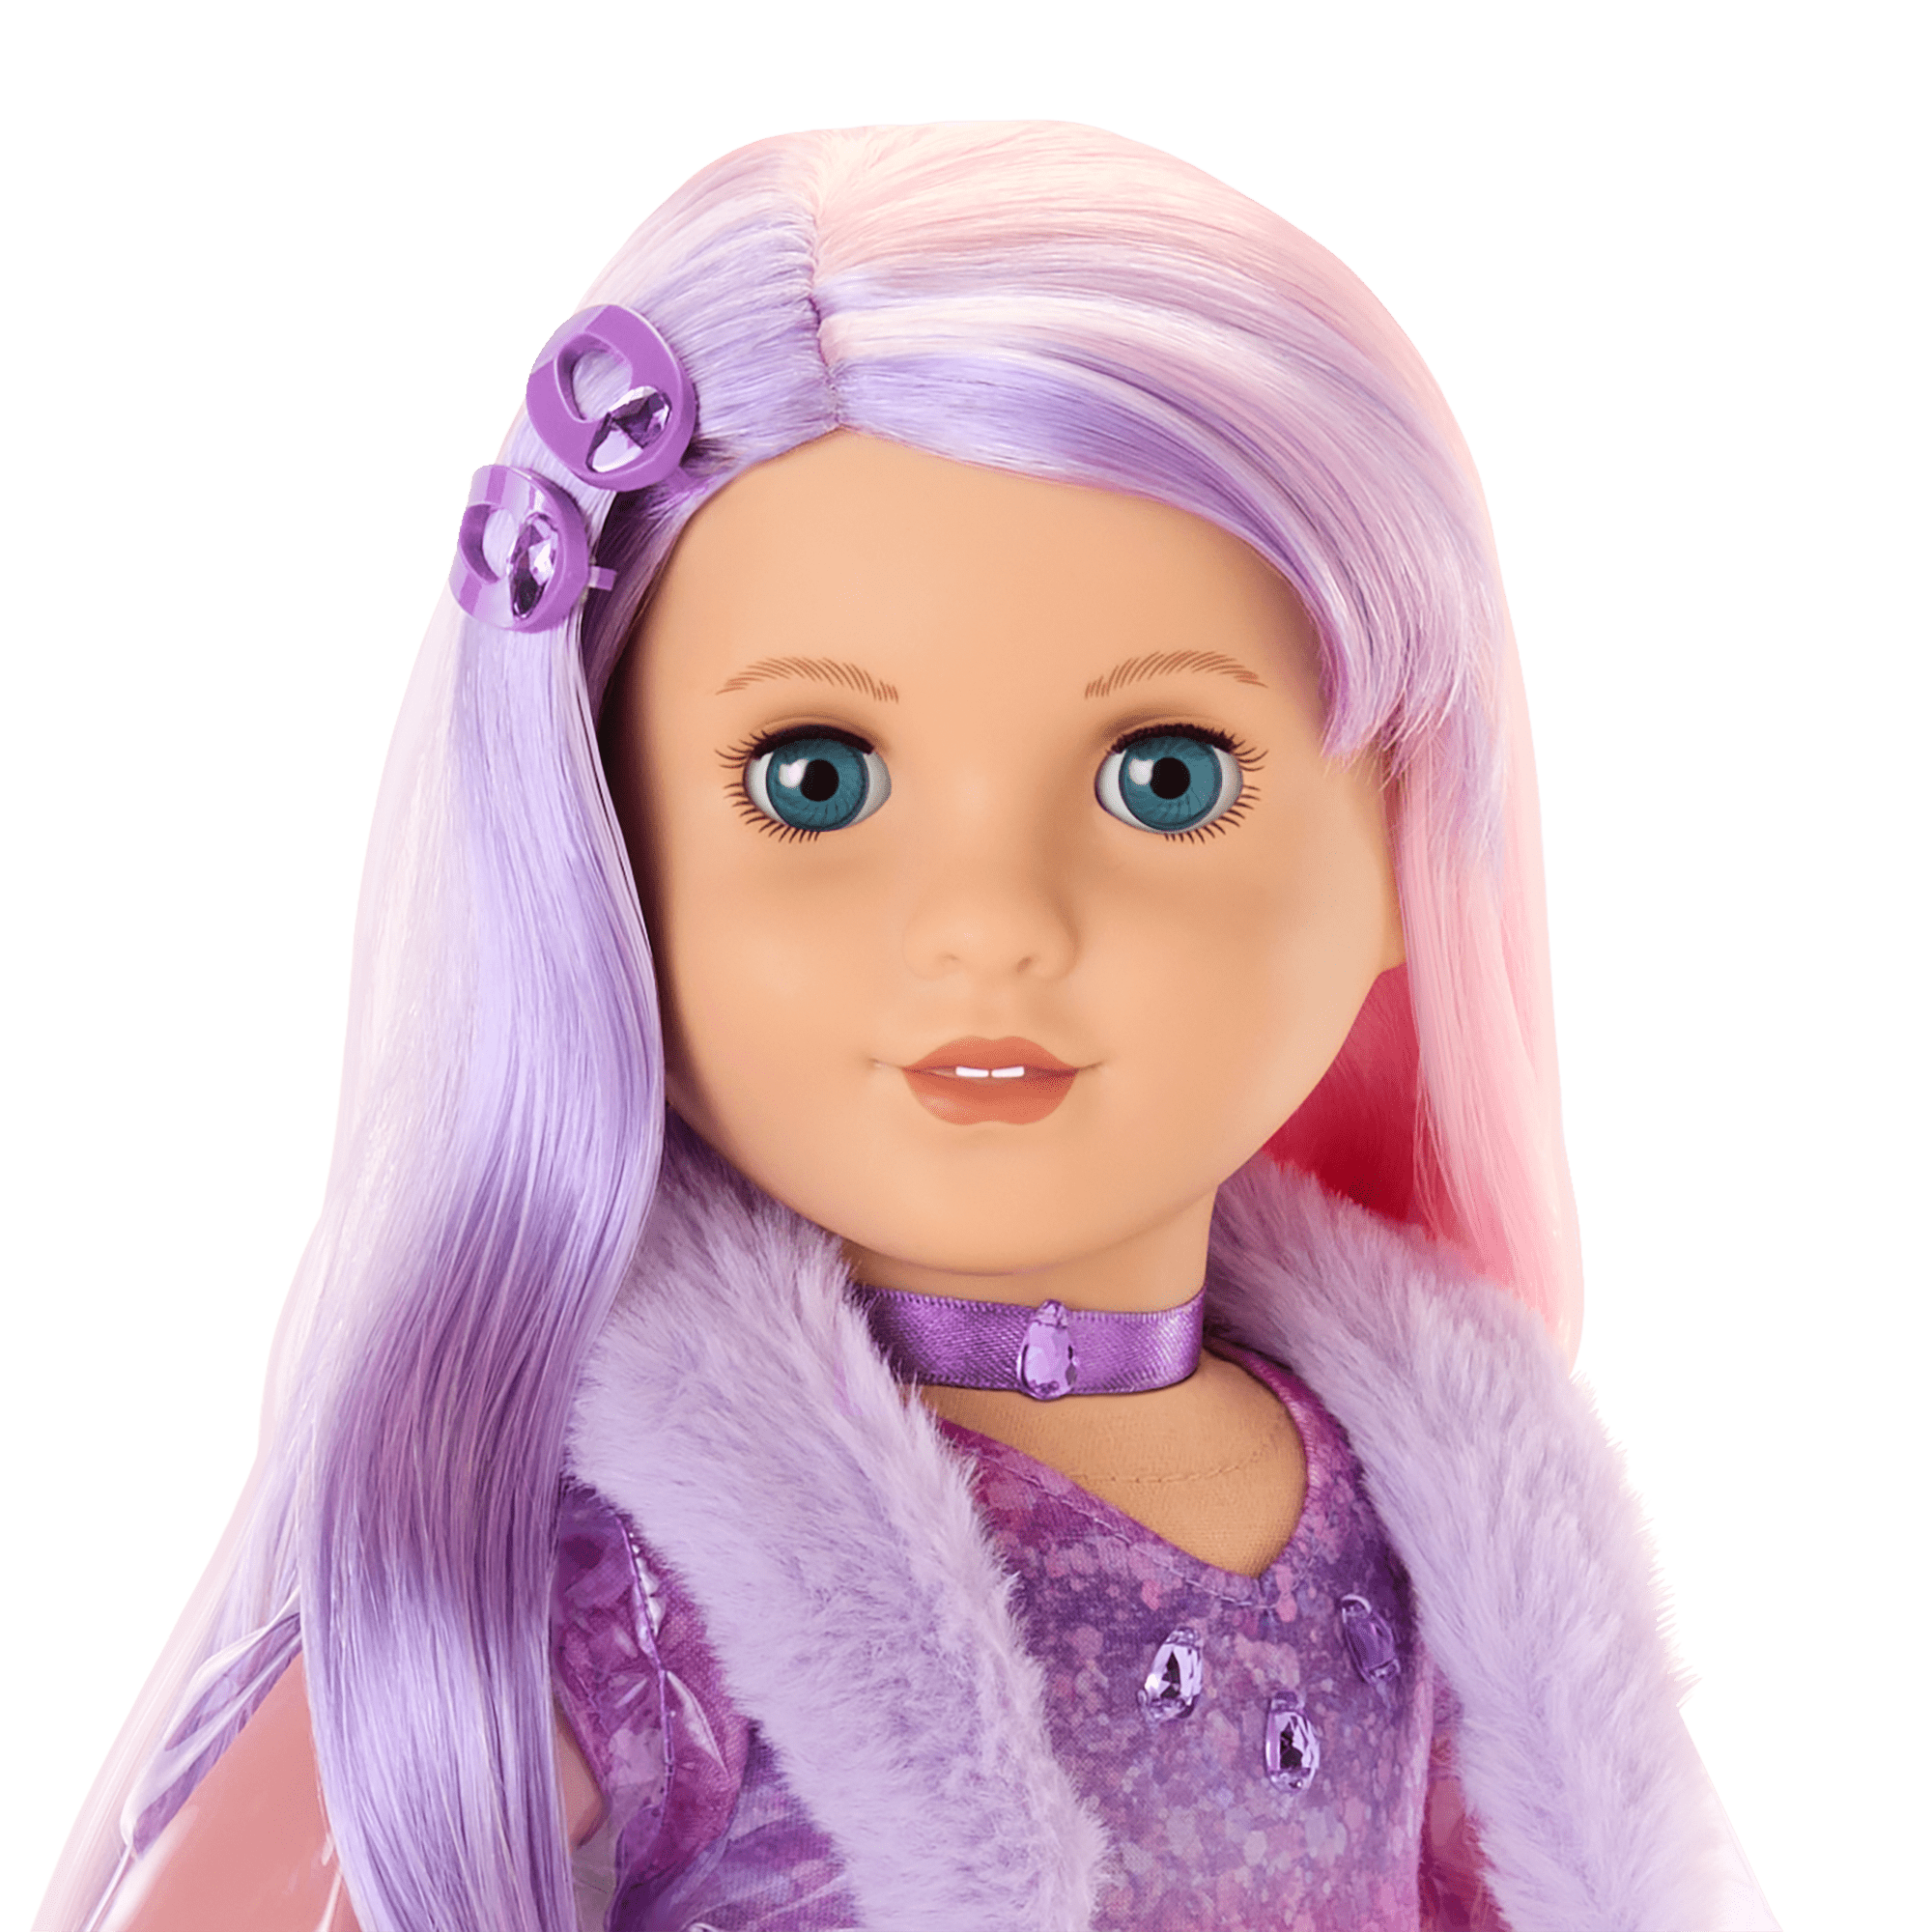 February Amazing Amethyst Outfit for 18-inch Dolls